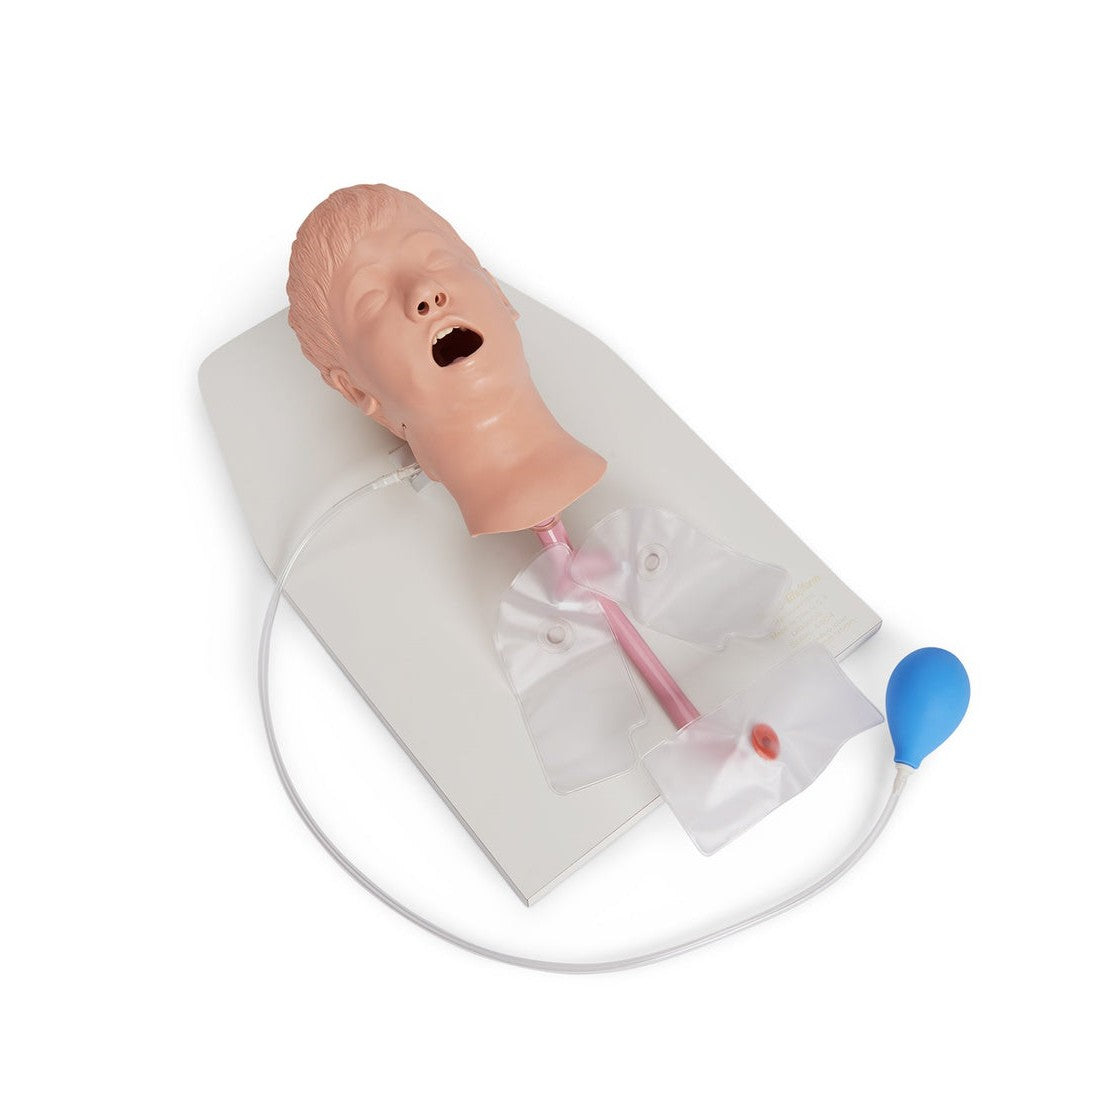 Life/form® Child Airway Management Trainer with Stand